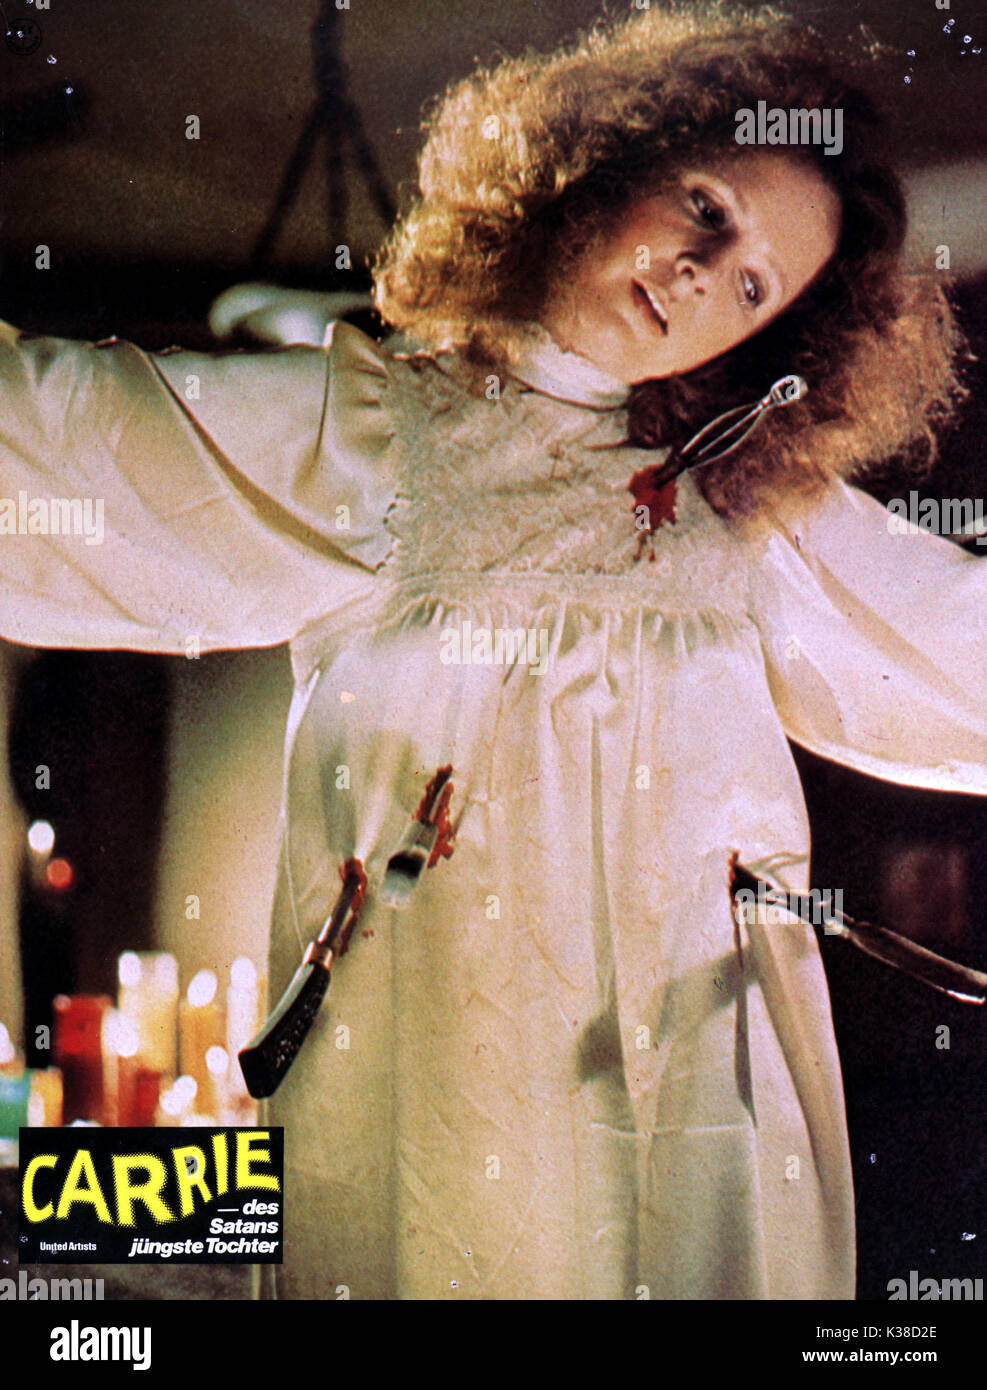 CARRIE PIPER LAURIE Date : 1976 Banque D'Images